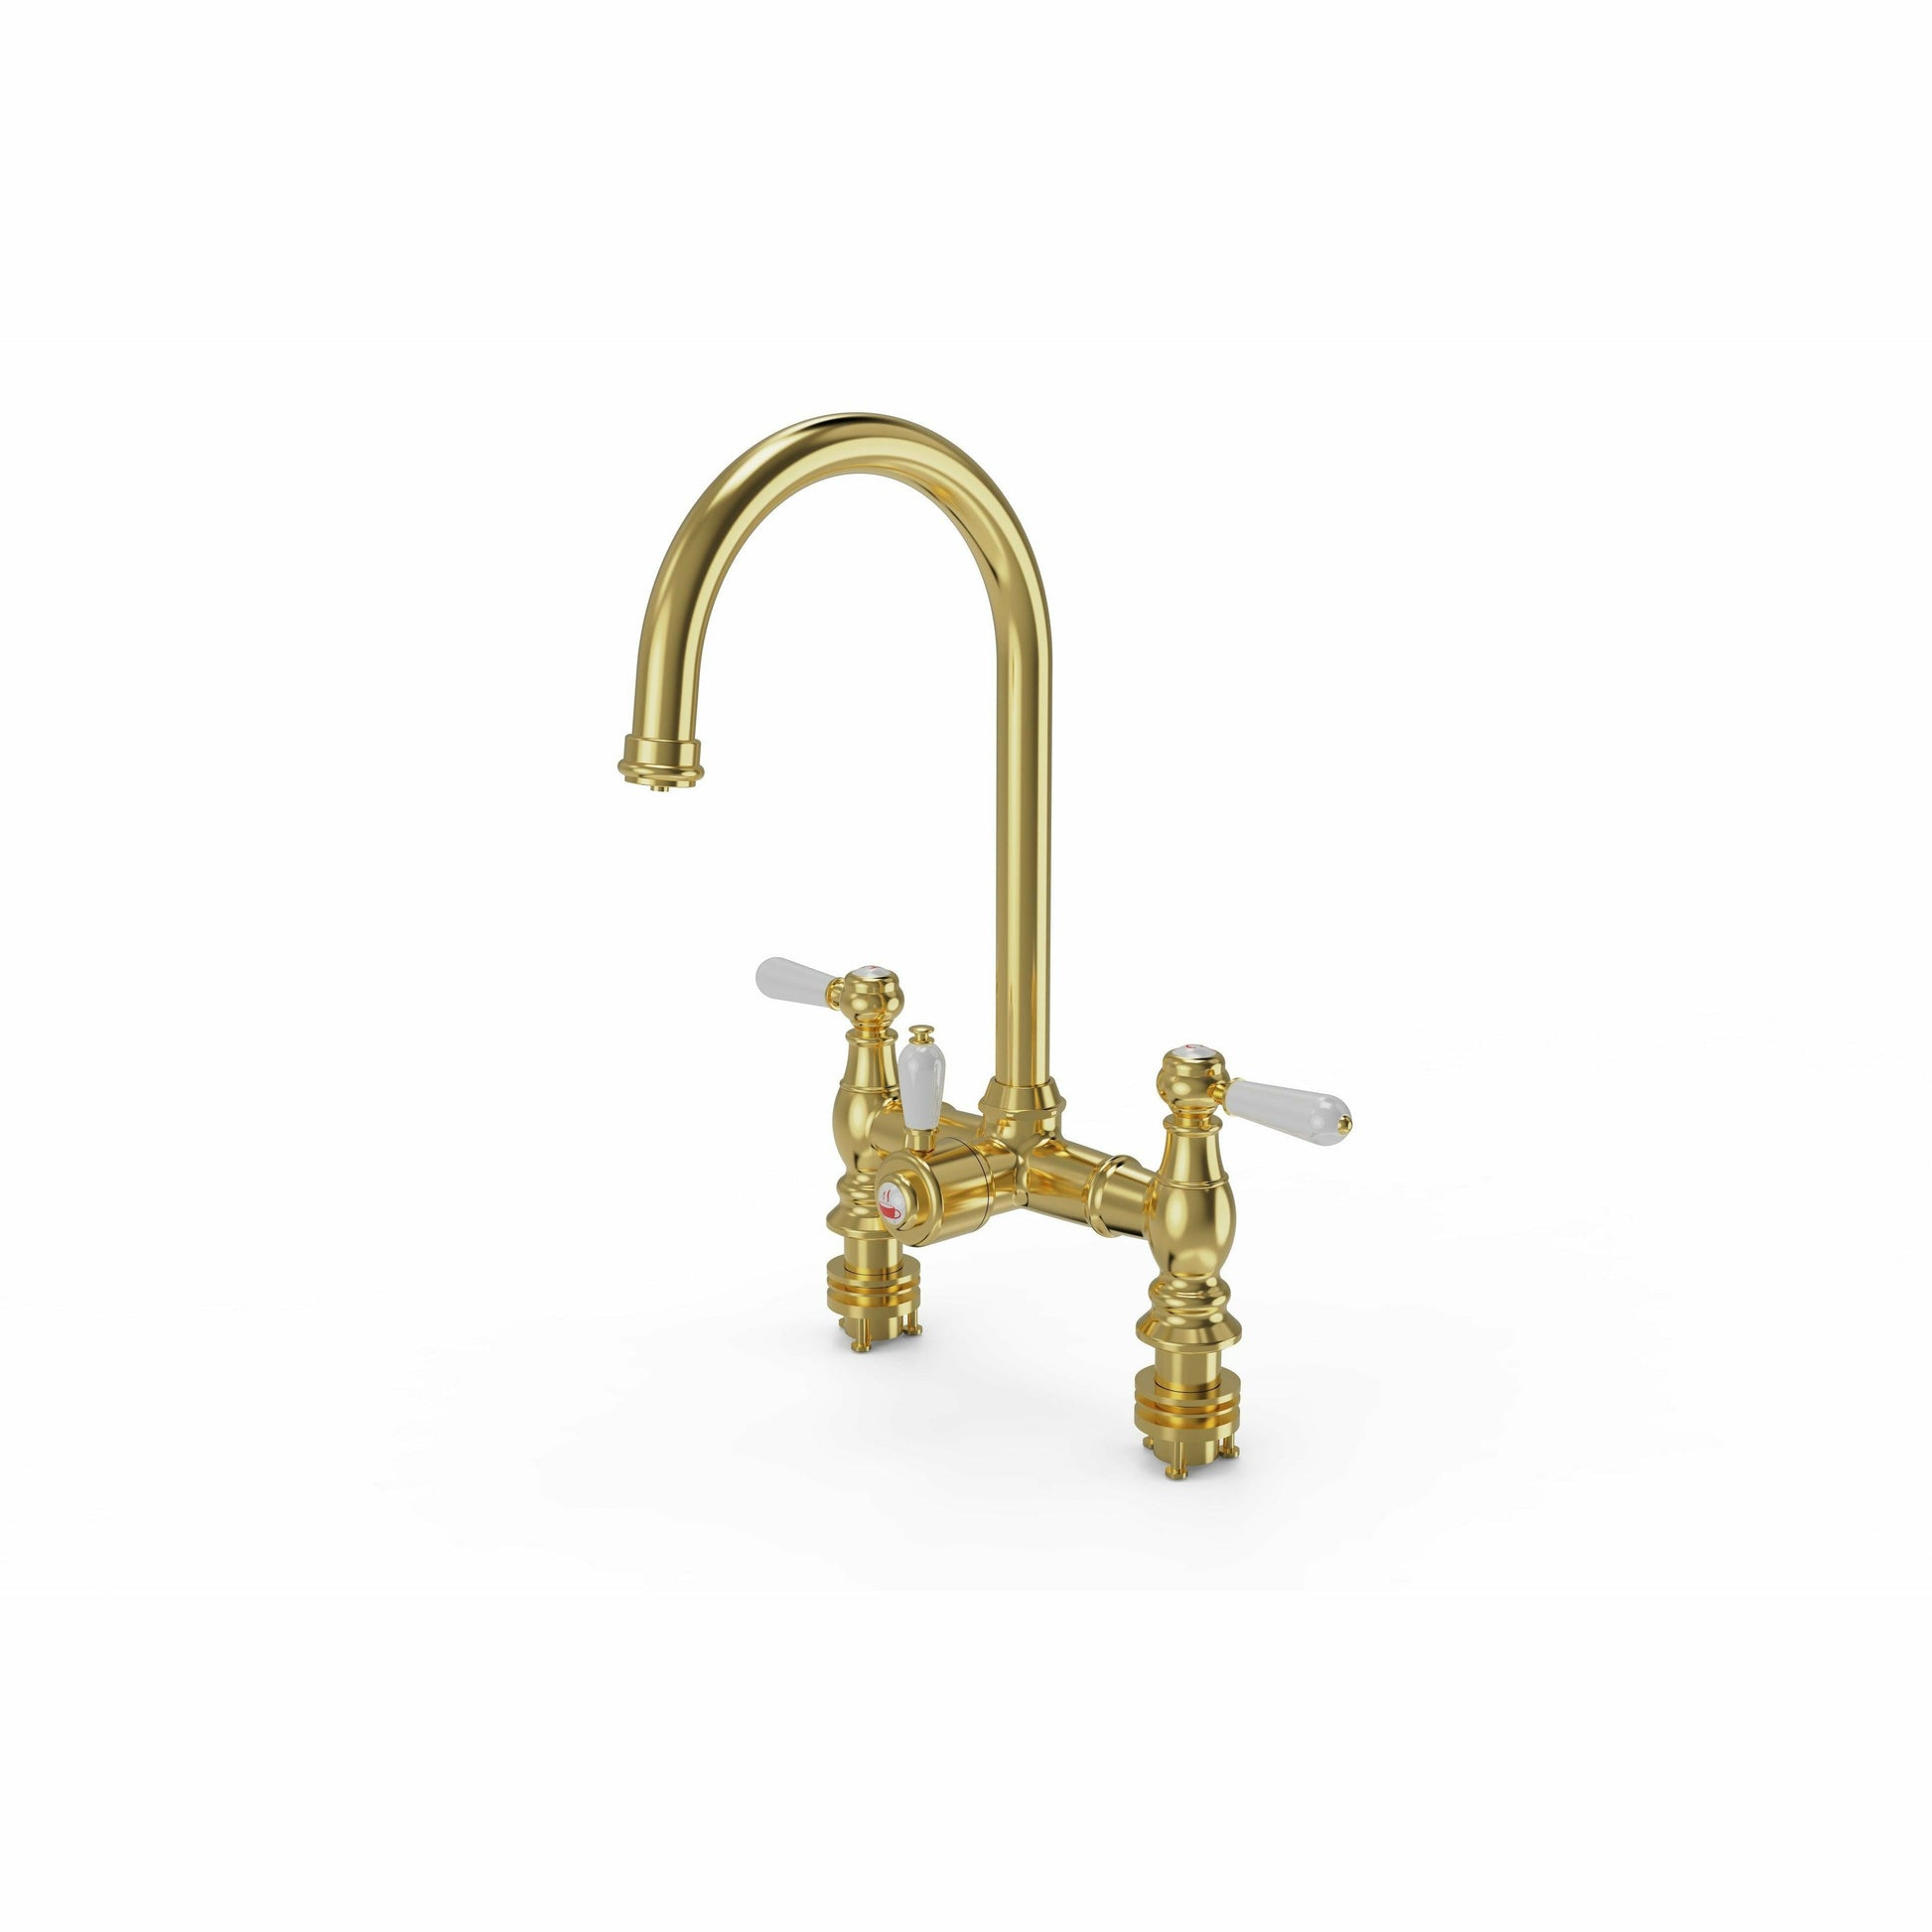 Ellsi Traditional Bridge 3-in-1 Boiling Water Tap With White Ceramic Handles - Brushed Brass Finish